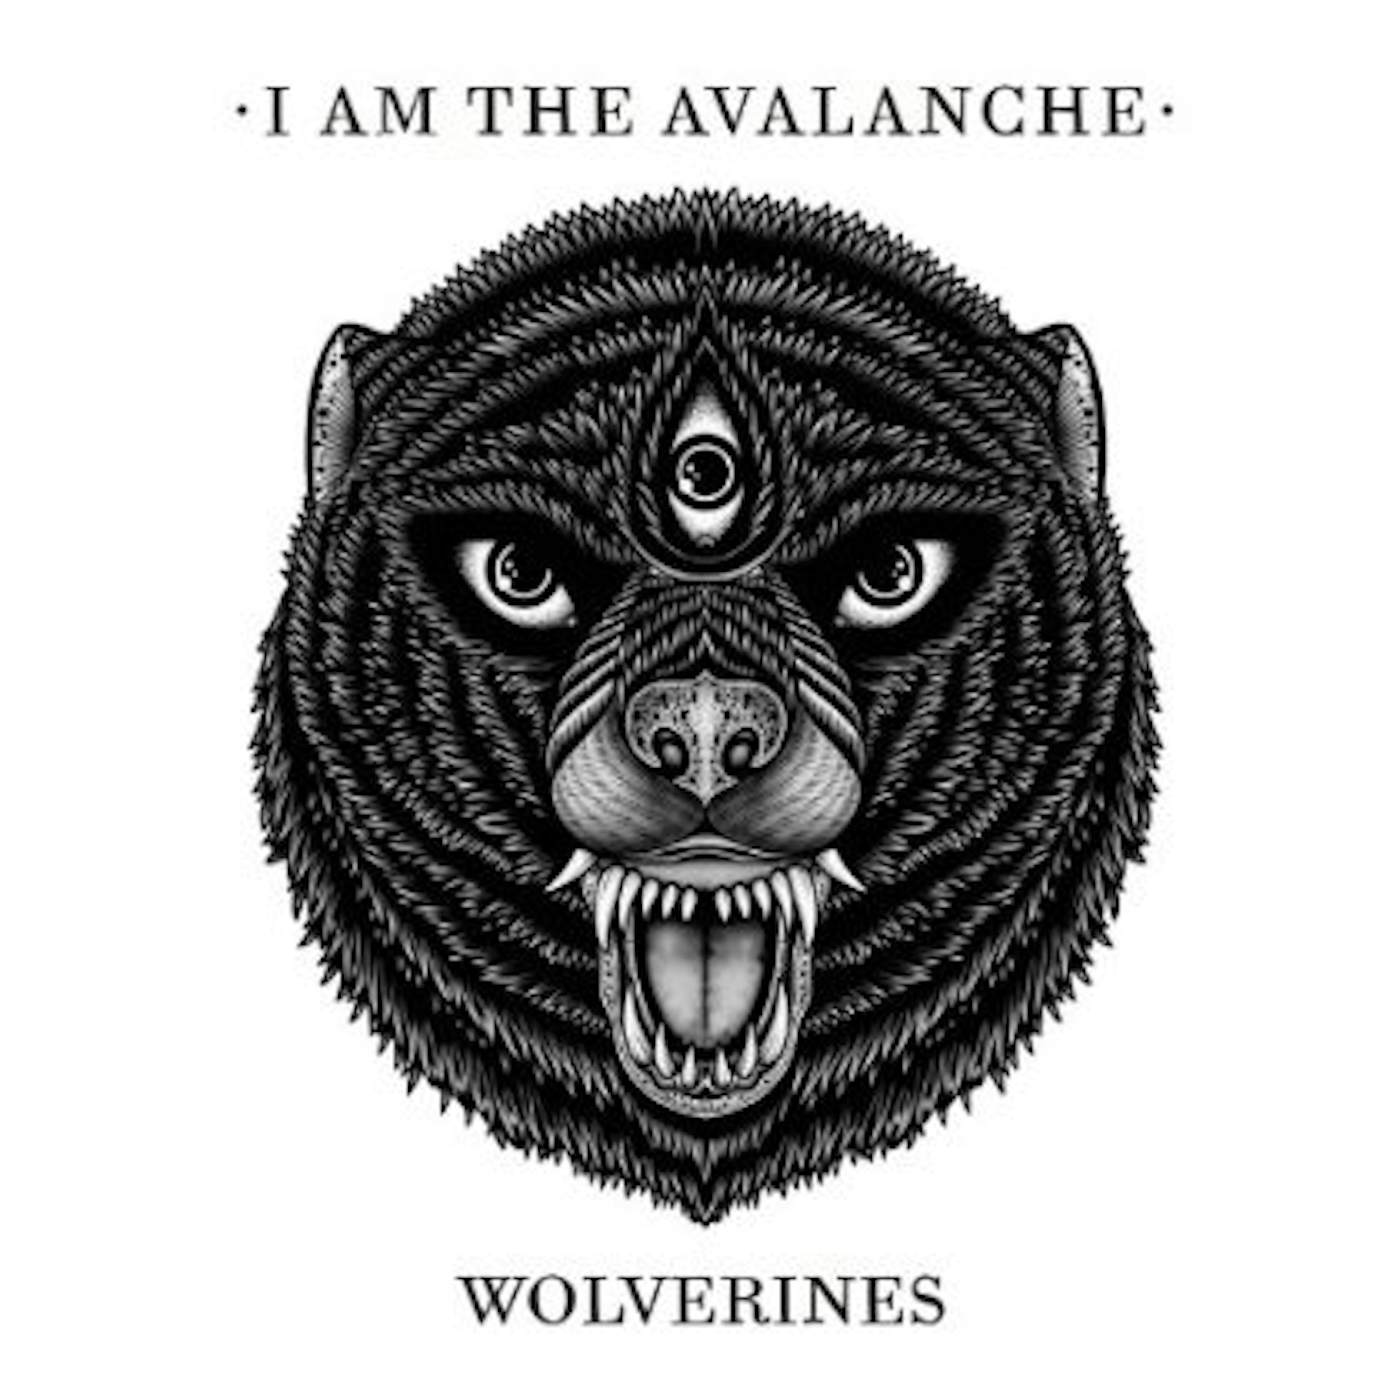 I Am The Avalanche Wolverines Vinyl Record